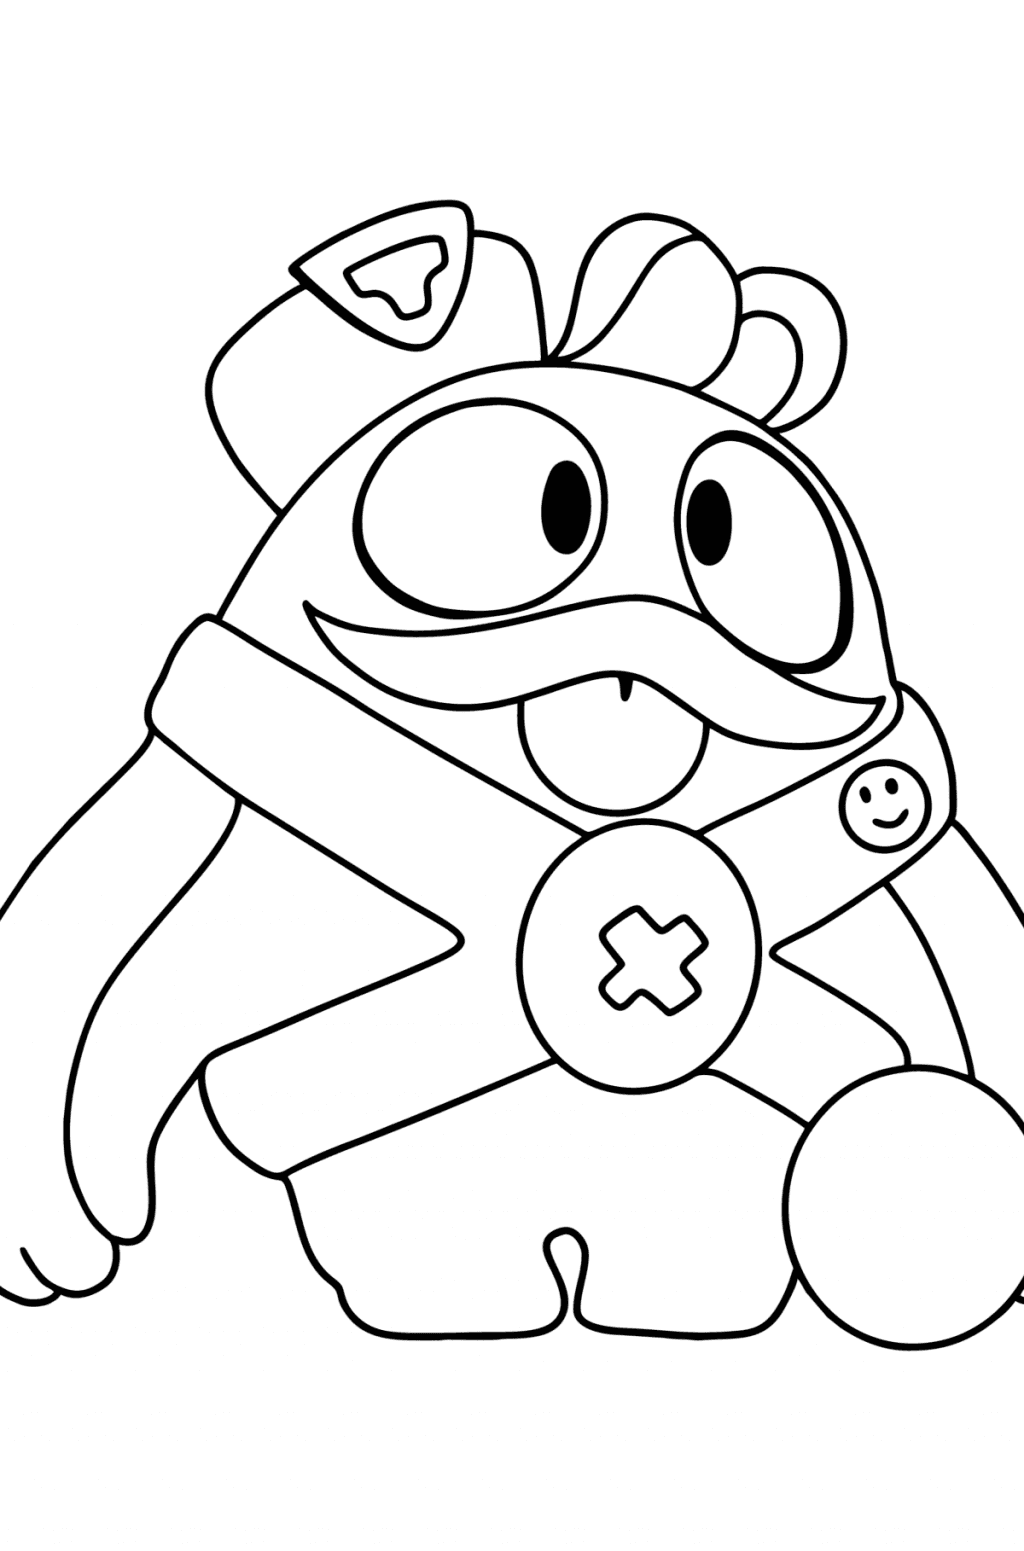 Brawl Stars Squeak coloring page ♥ Online and Print for Free!